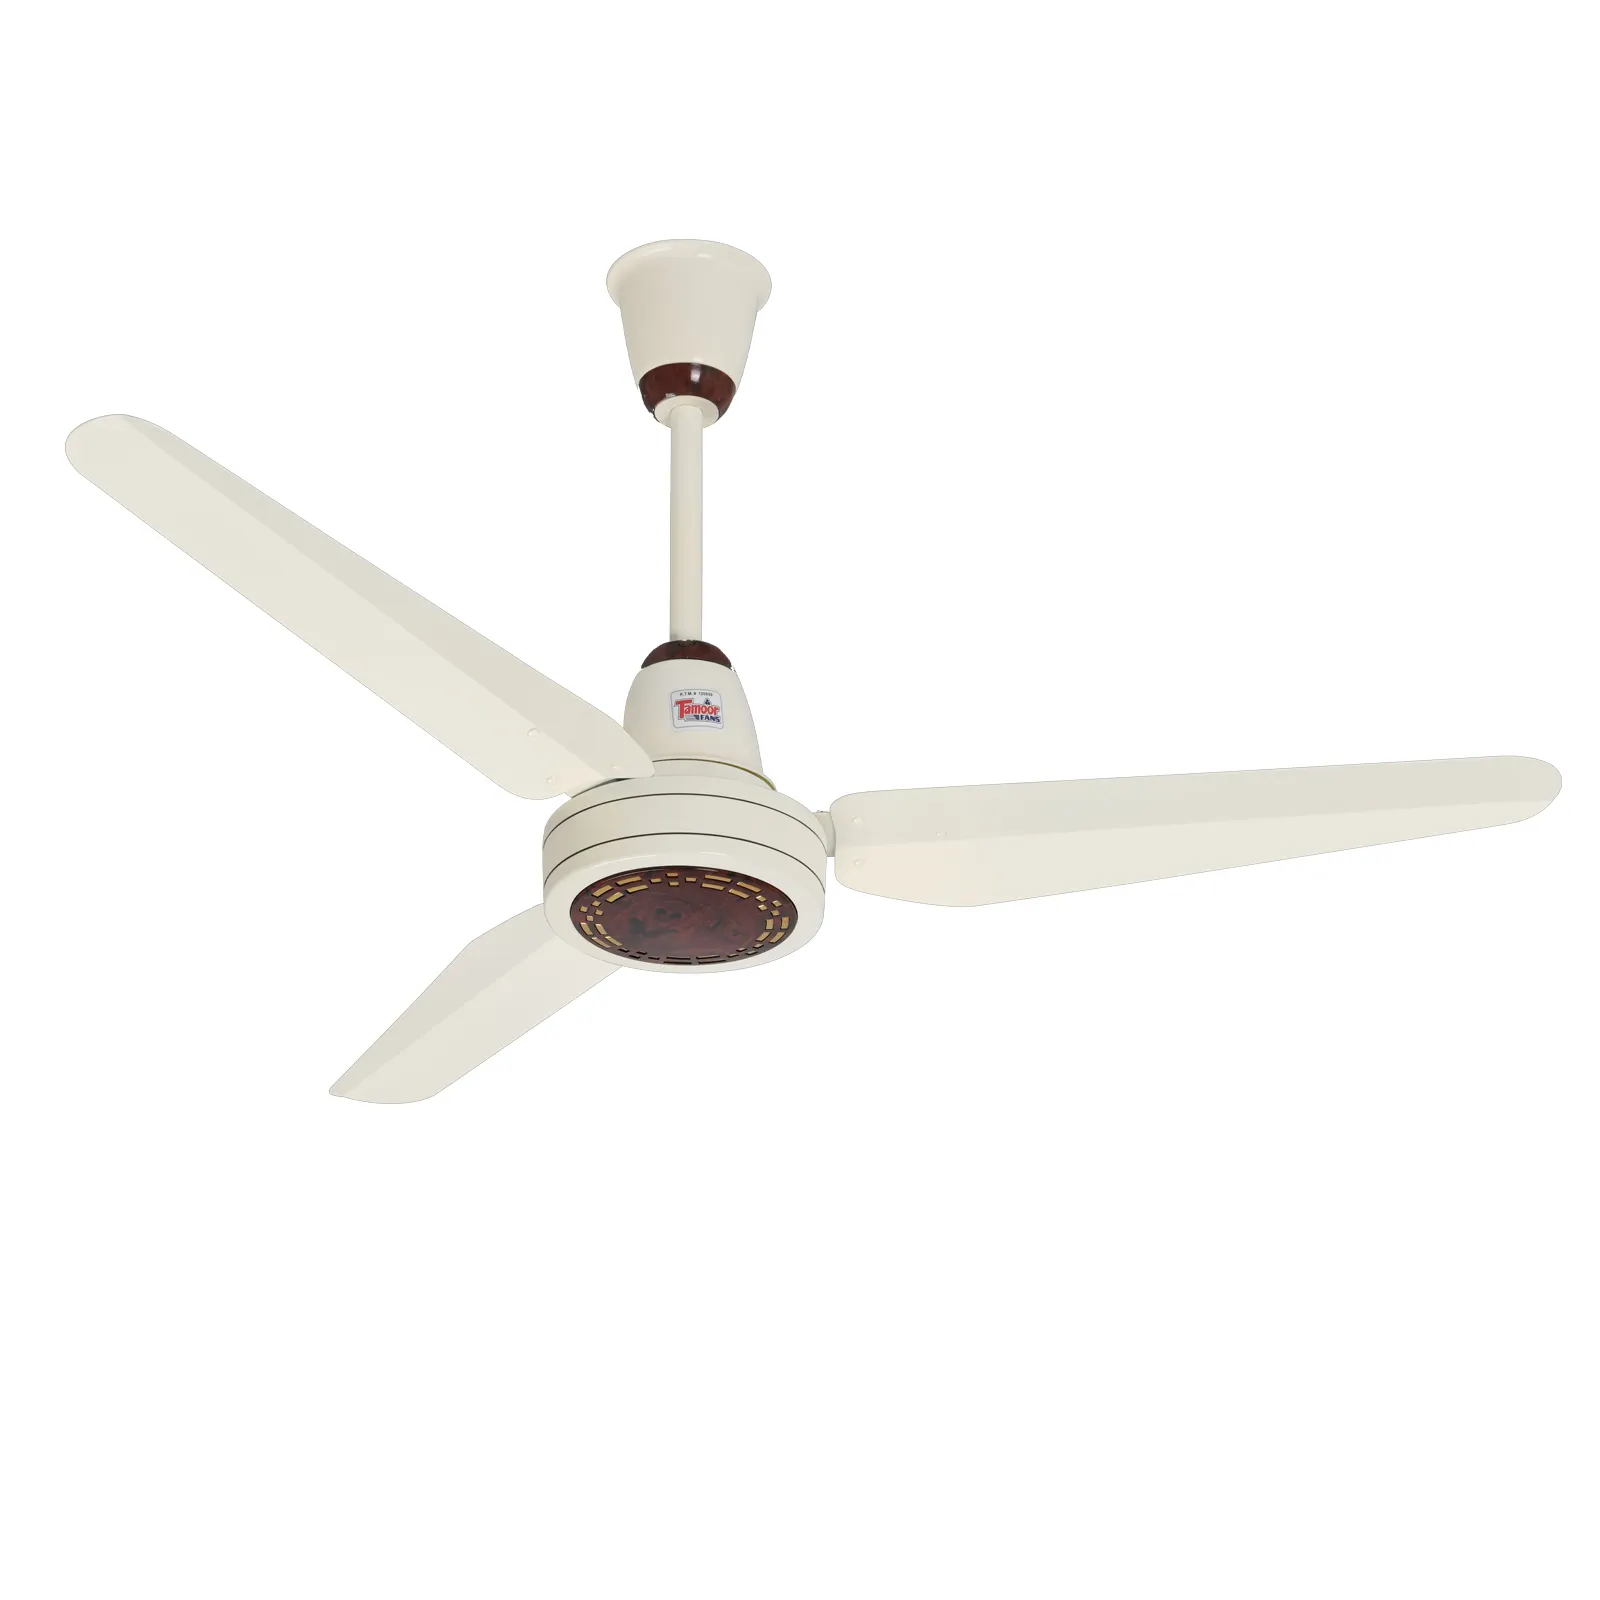 Tamoor Fans |Super Nafees Model | AC Series|ceiling fan with 100% copper winding